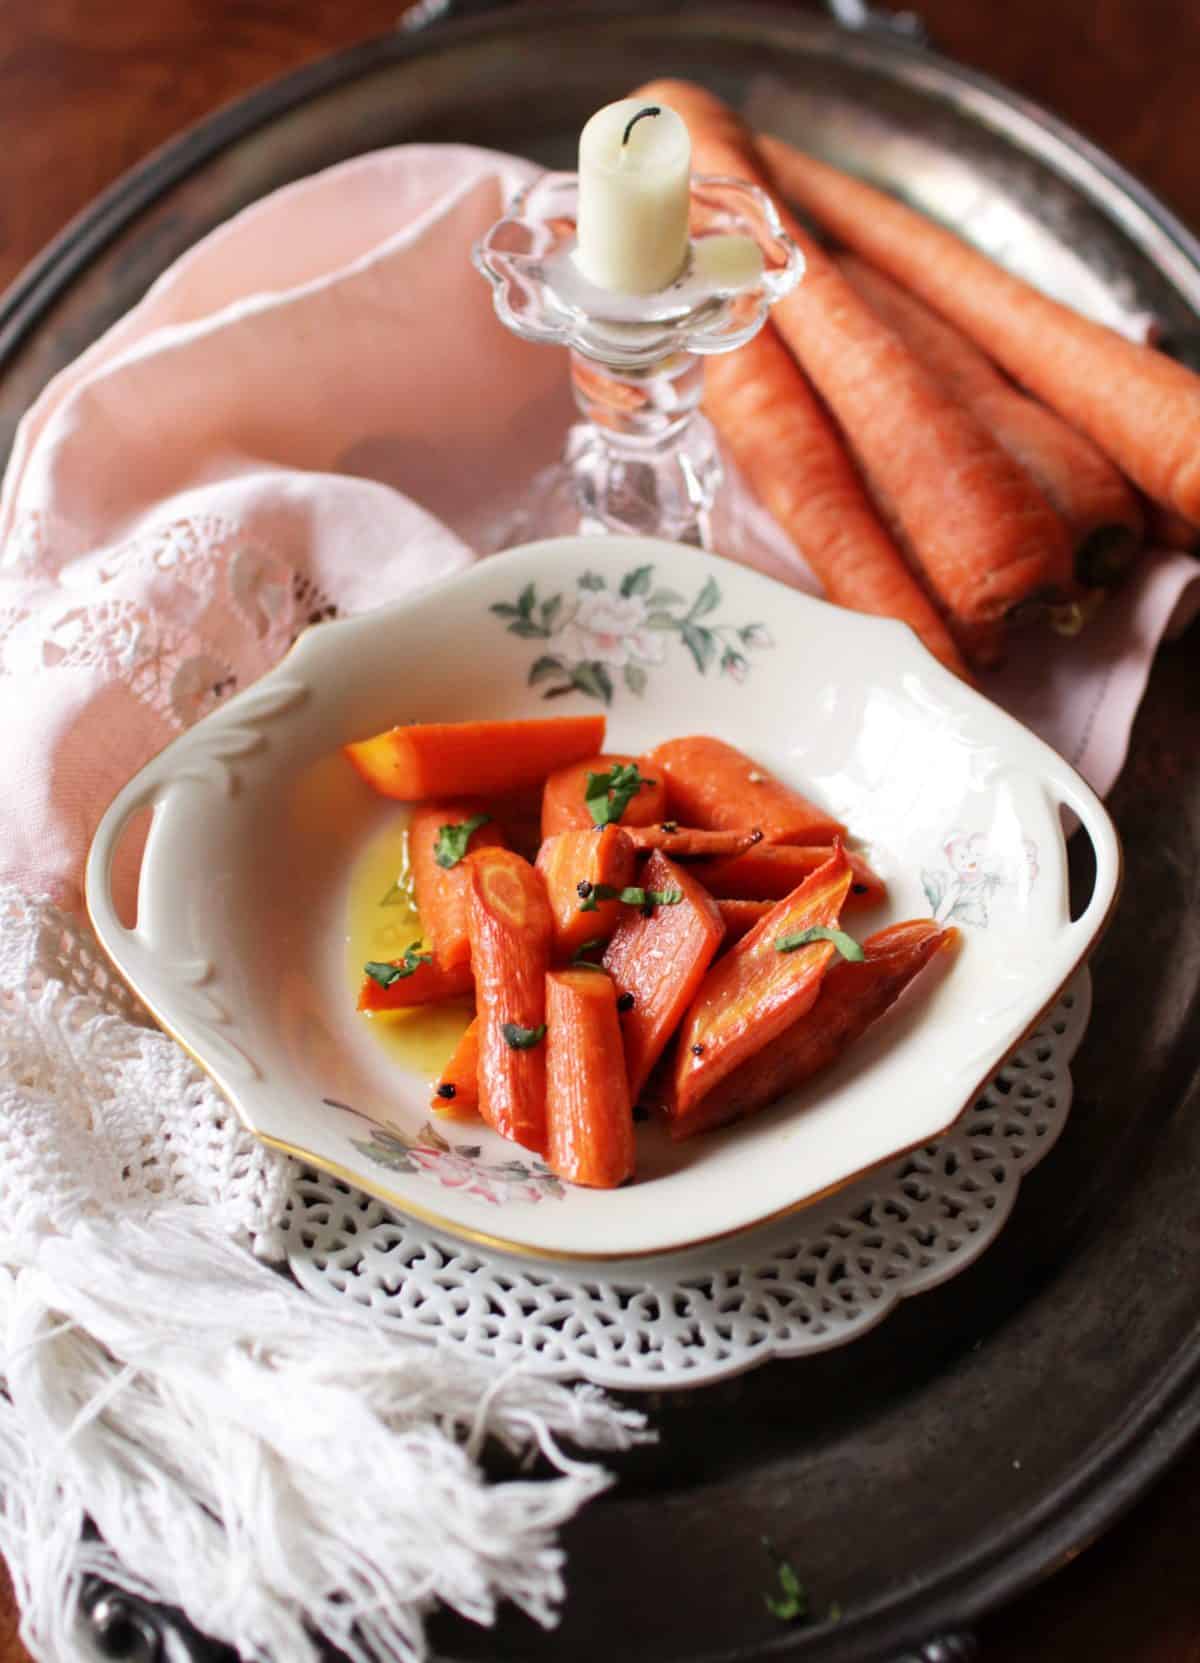 a plate of cooked carrots on a silver tray next to a few raw carrots.